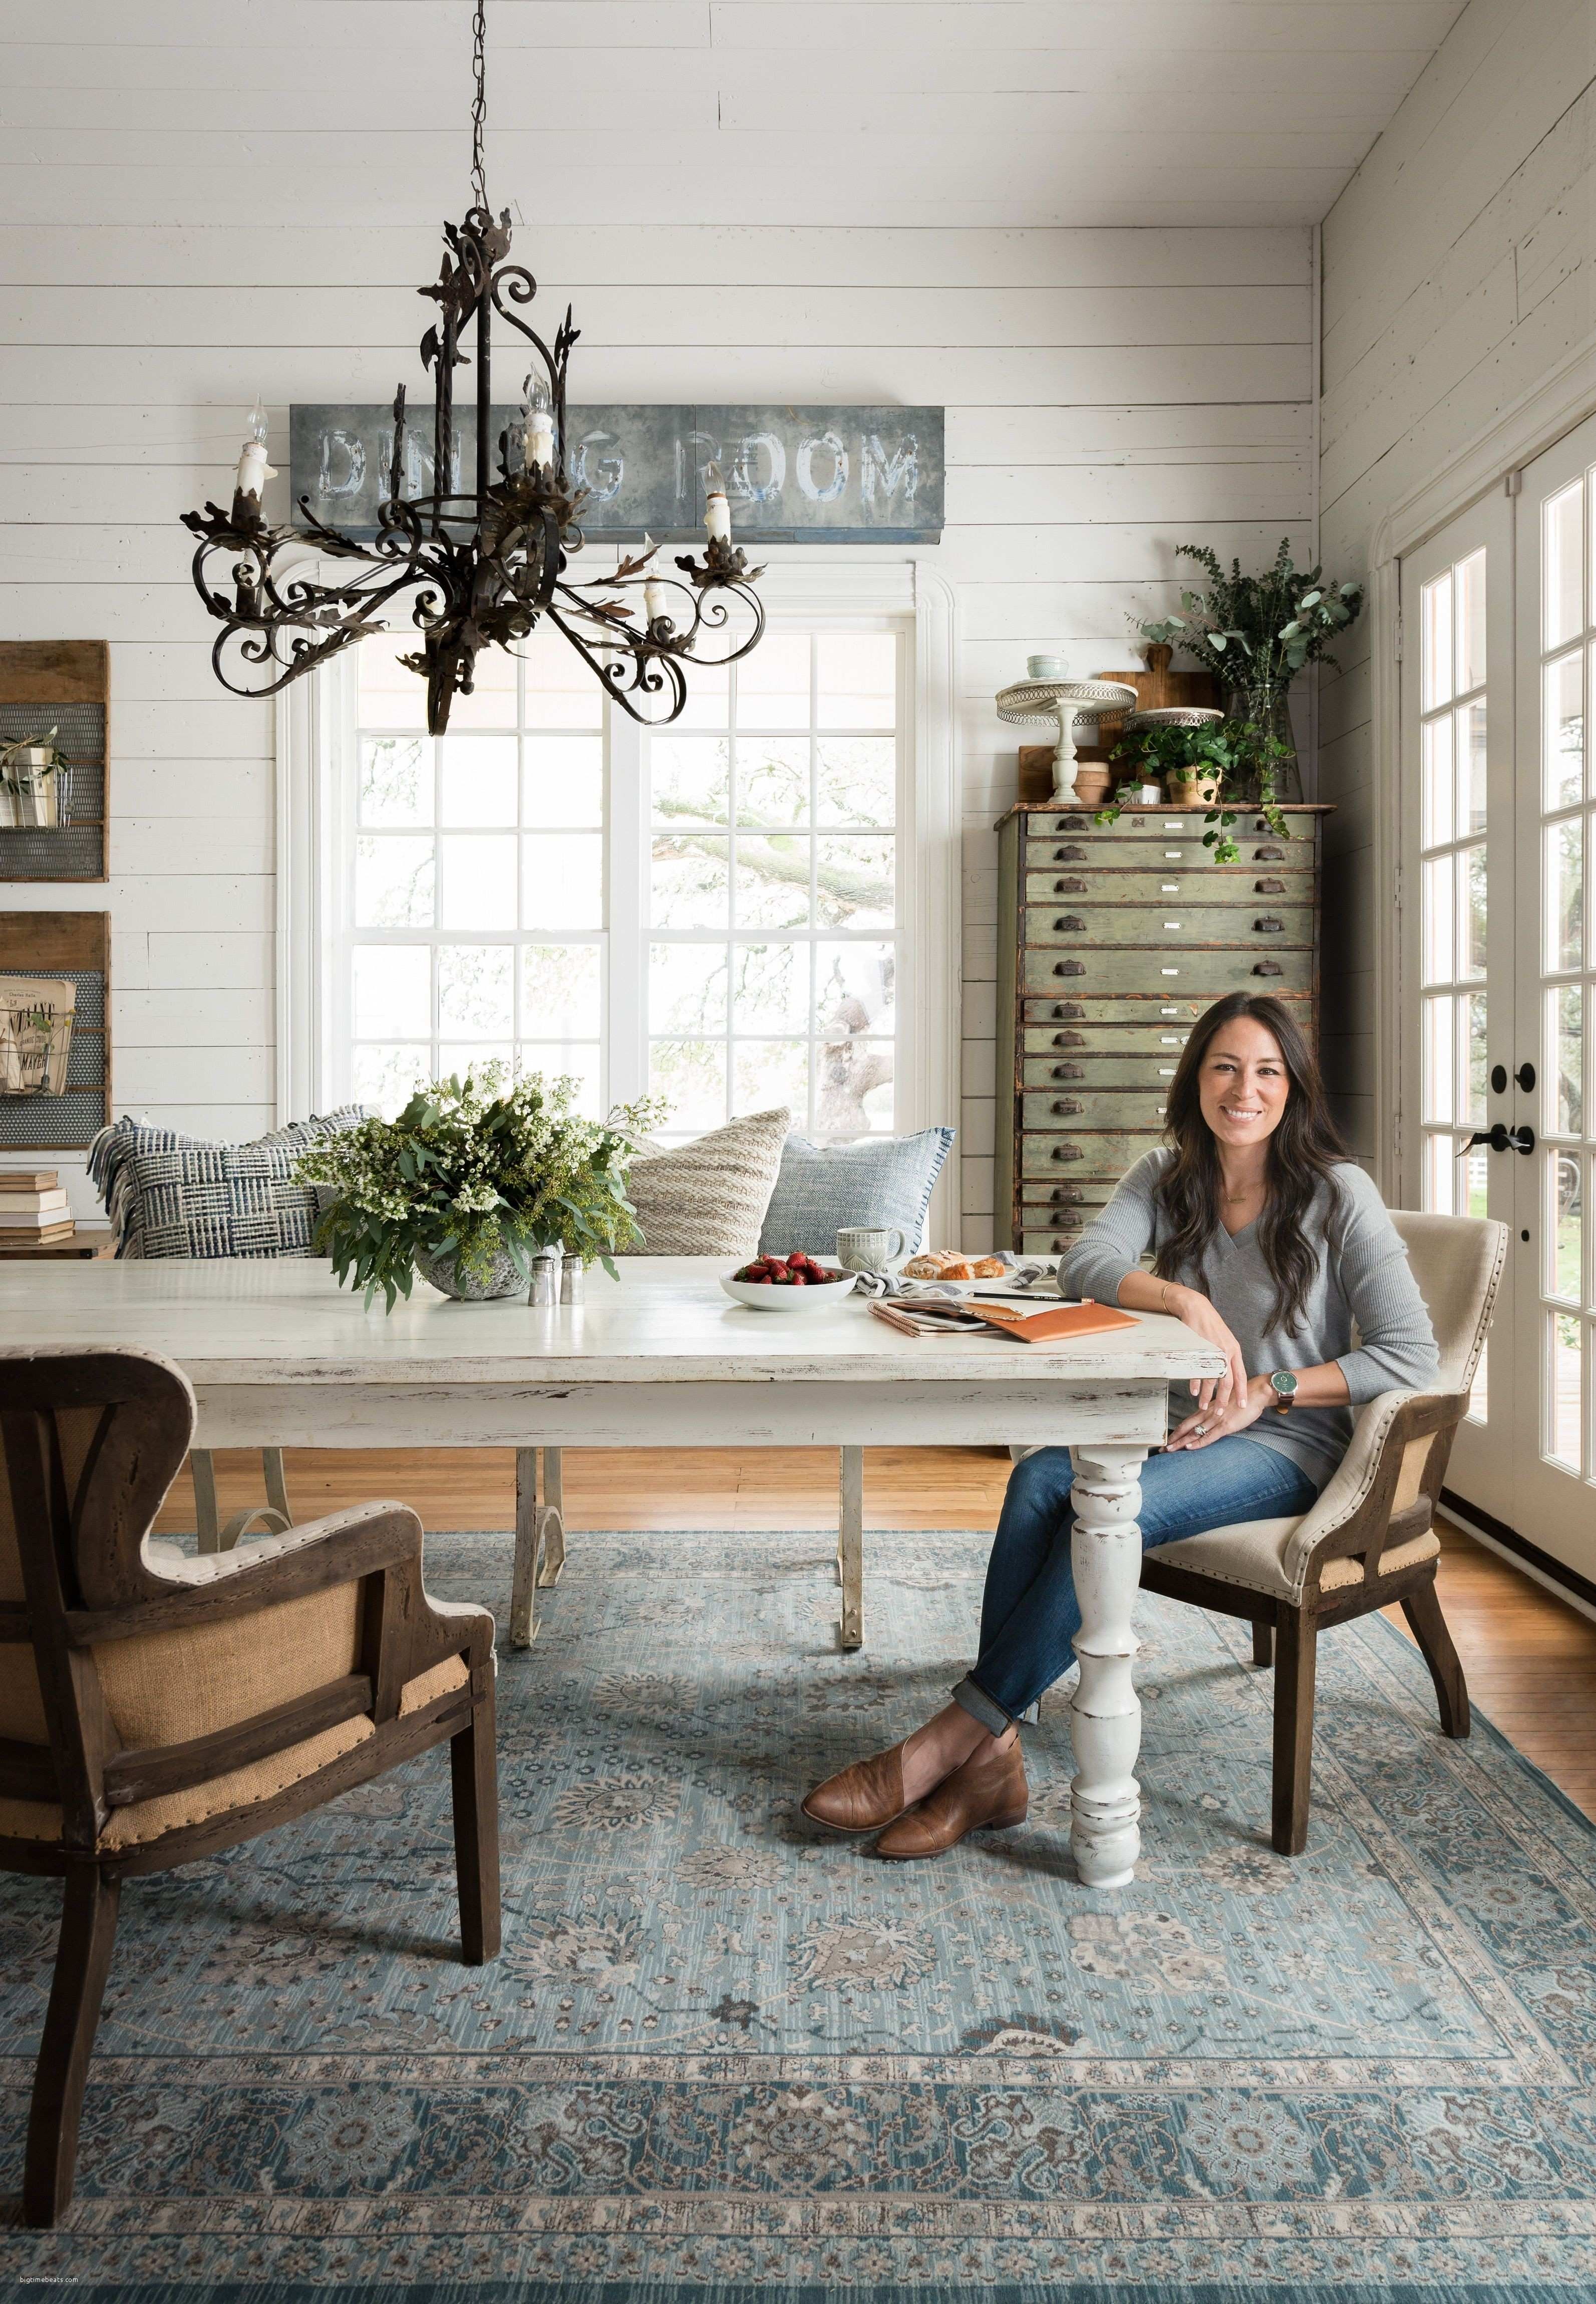 Adorable Ashley Furniture Magnolia Home Or Magnolia Homejoanna With Regard To Magnolia Home Homestead 3 Piece Sectionals By Joanna Gaines (View 18 of 25)